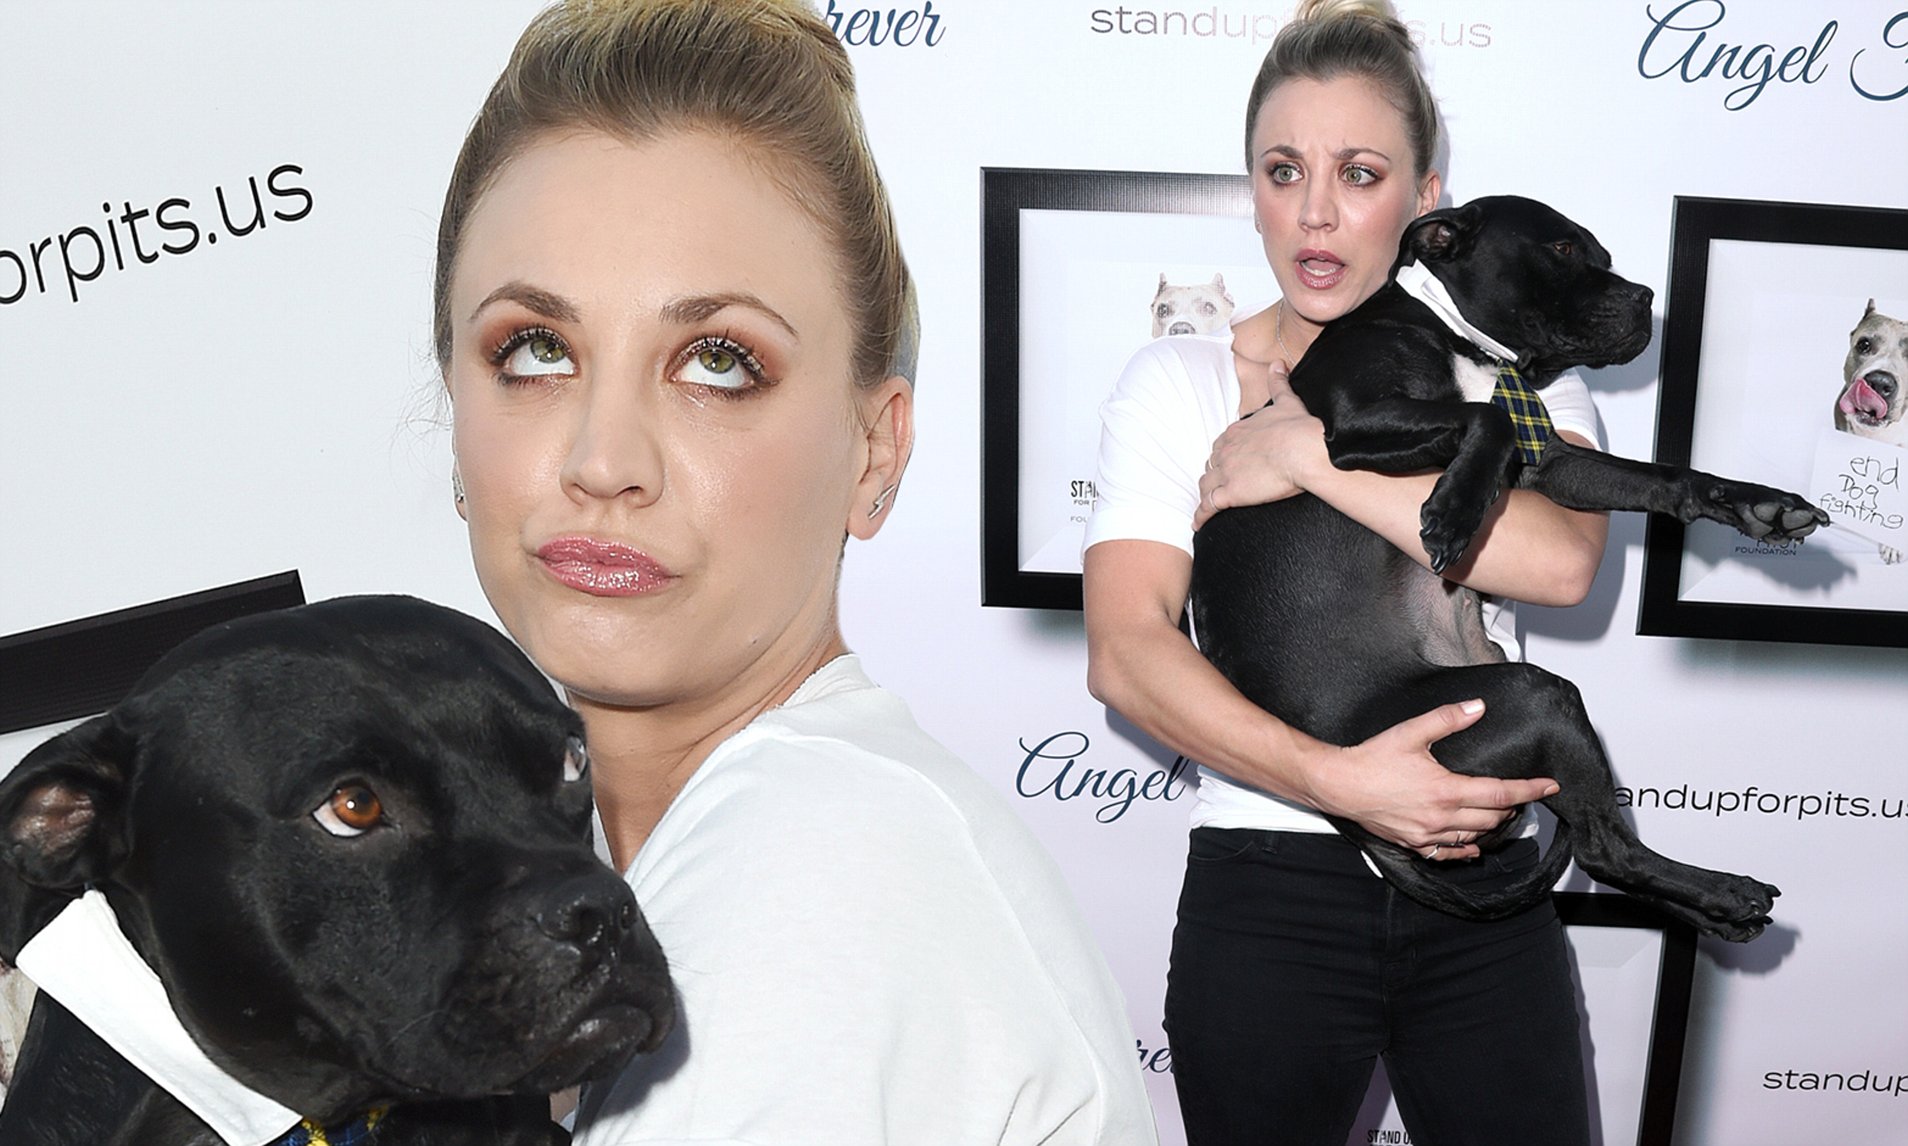 christian paul layug recommends Kaley Cuoco Doggy Style